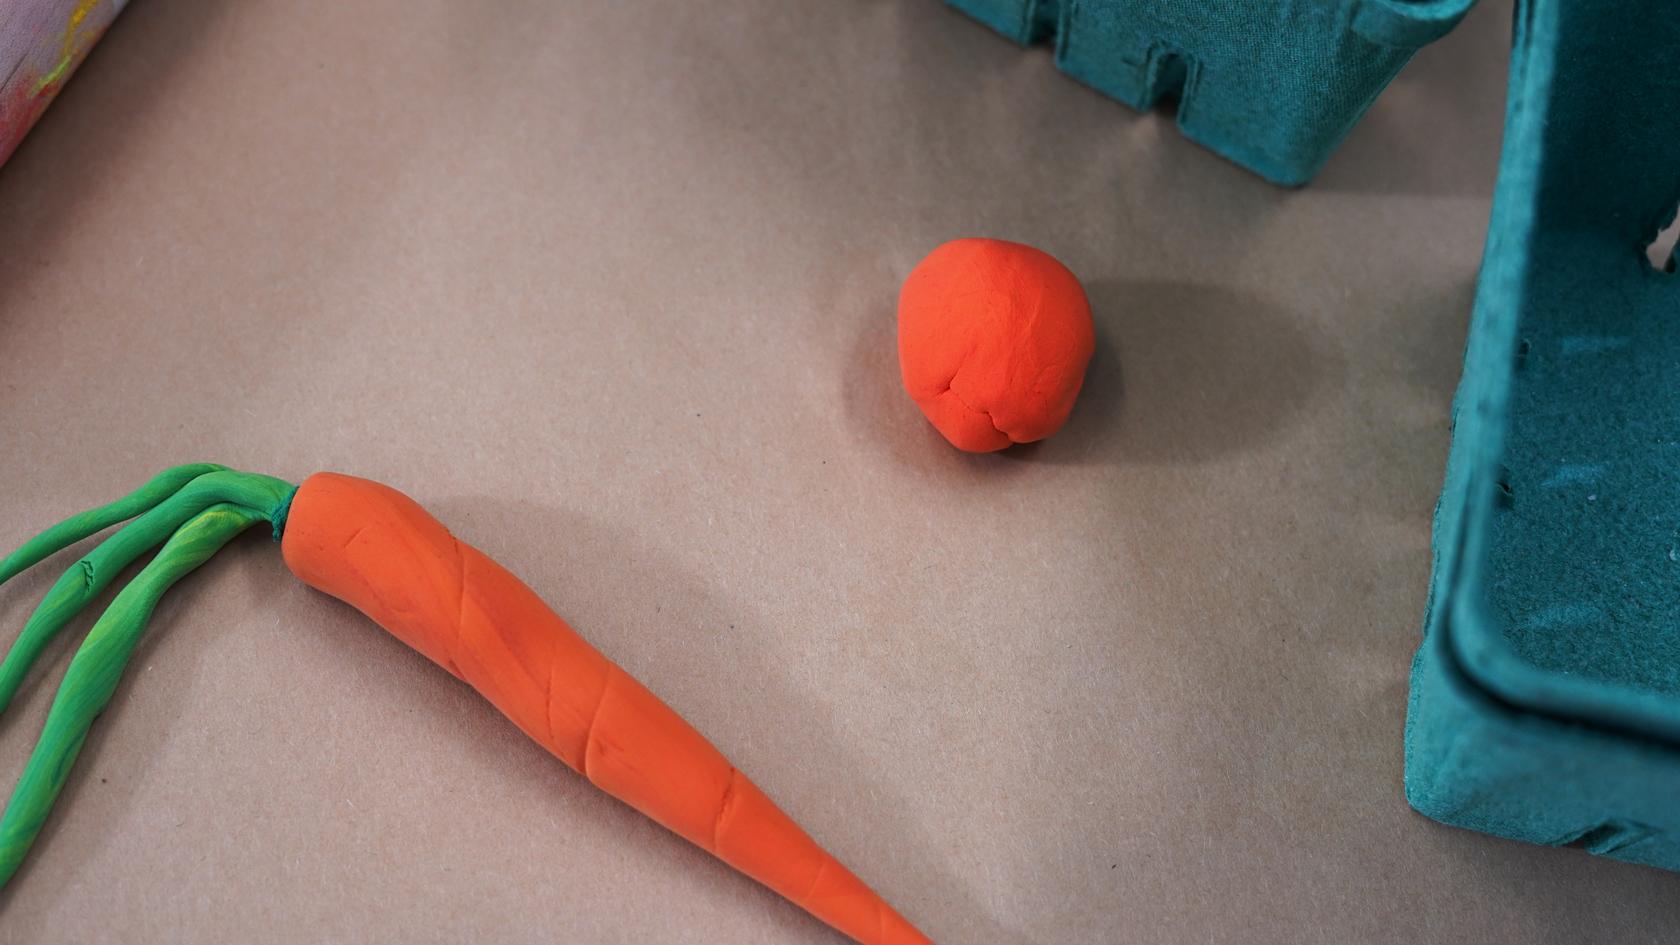 Photo of a ball of orange modeling clay and a carrot made from modeling clay